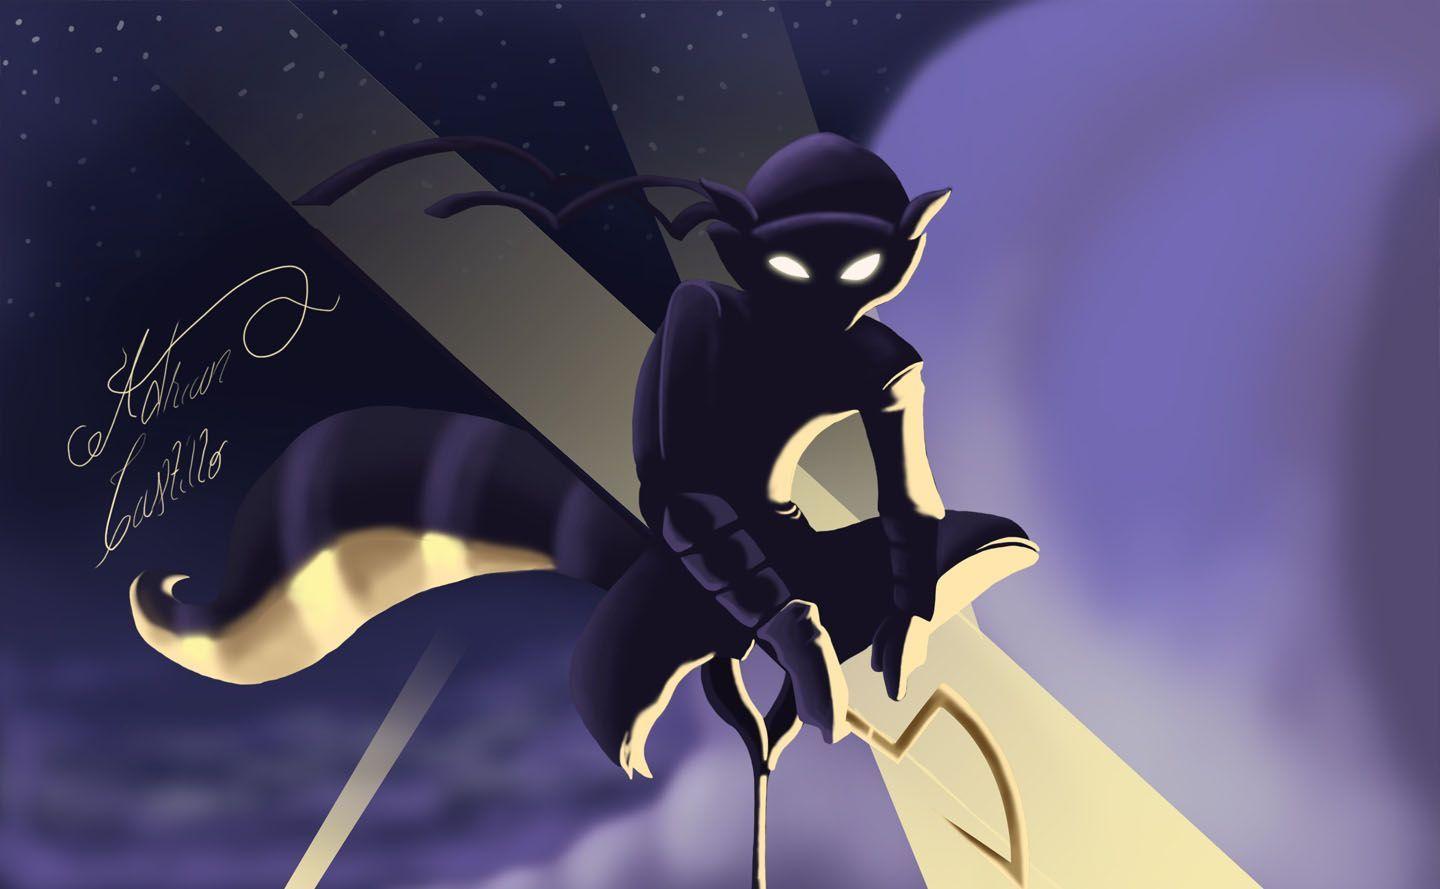 Sly Cooper 4 Wallpapers